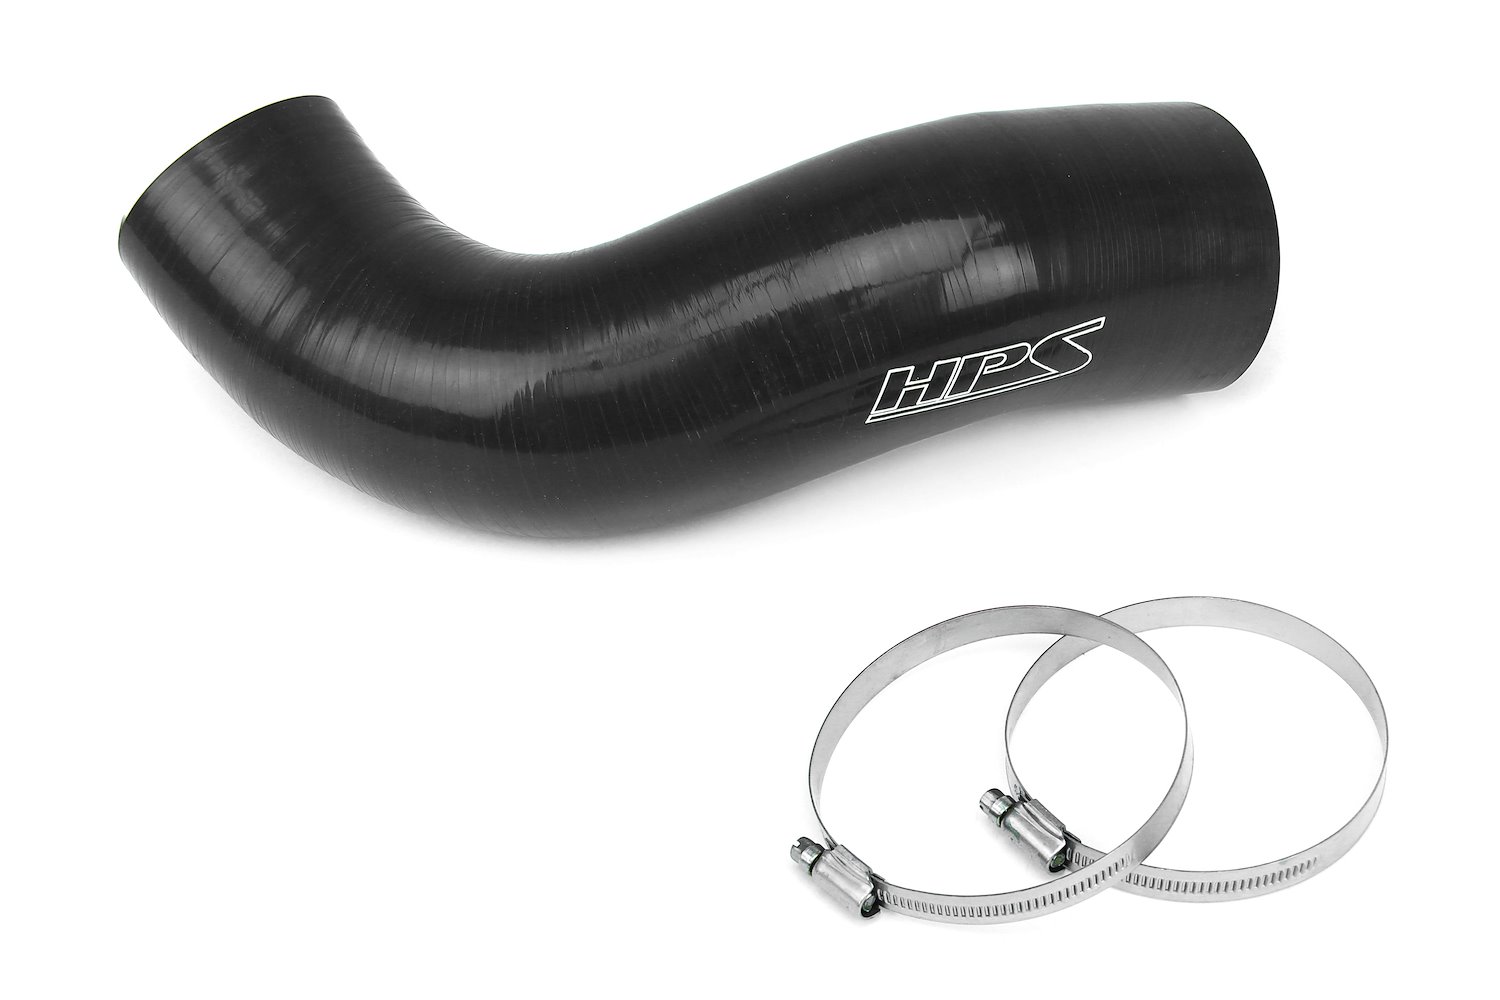 57-1922-BLK Silicone Air Intake Kit, Replaces Stock Restrictive Air Intake, Improve Throttle Response, No Heat Soak